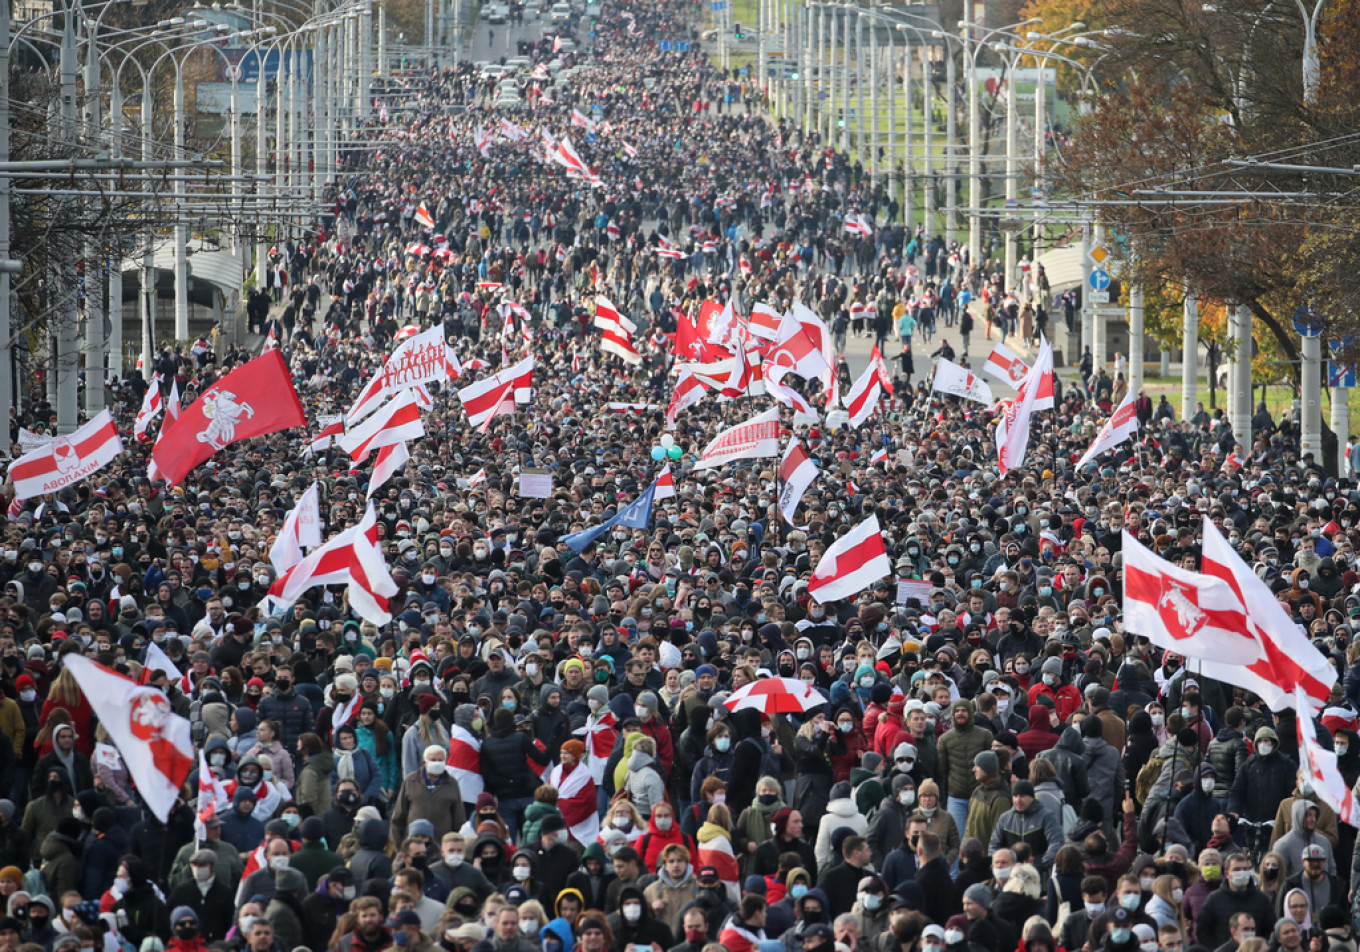 Tens of Thousands March in Belarus Despite Police Threat to Open Fire